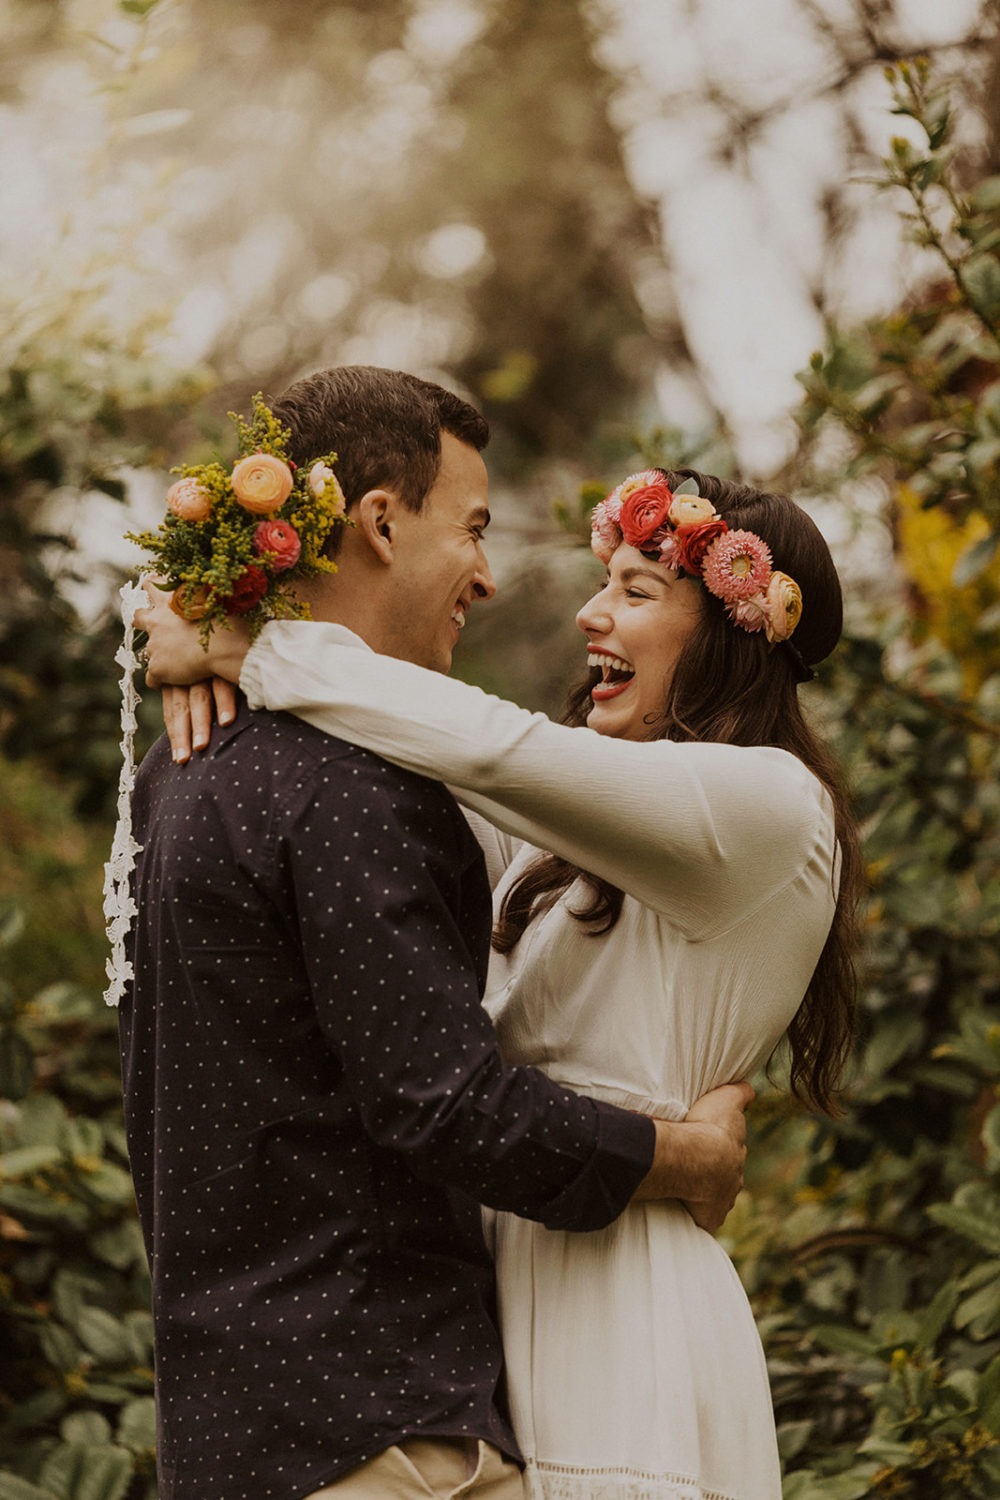 Couple embraces while holding spring wedding flowers